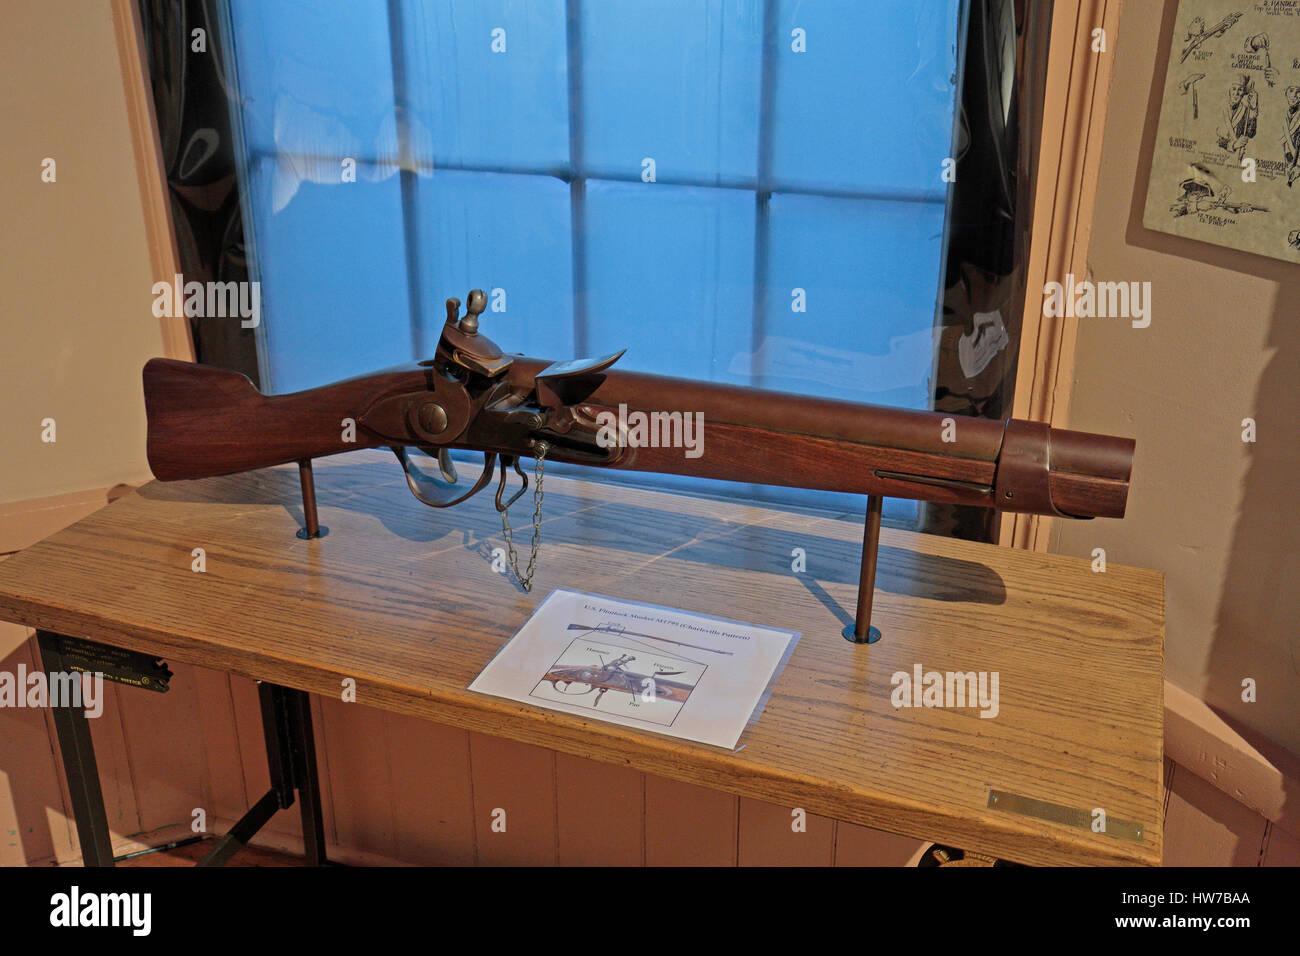 A US Flintlock Musket M1795 (Charleville Pattern) on display in the Springfield Armory National Historic Site, Springfield, Ma, United States. Stock Photo